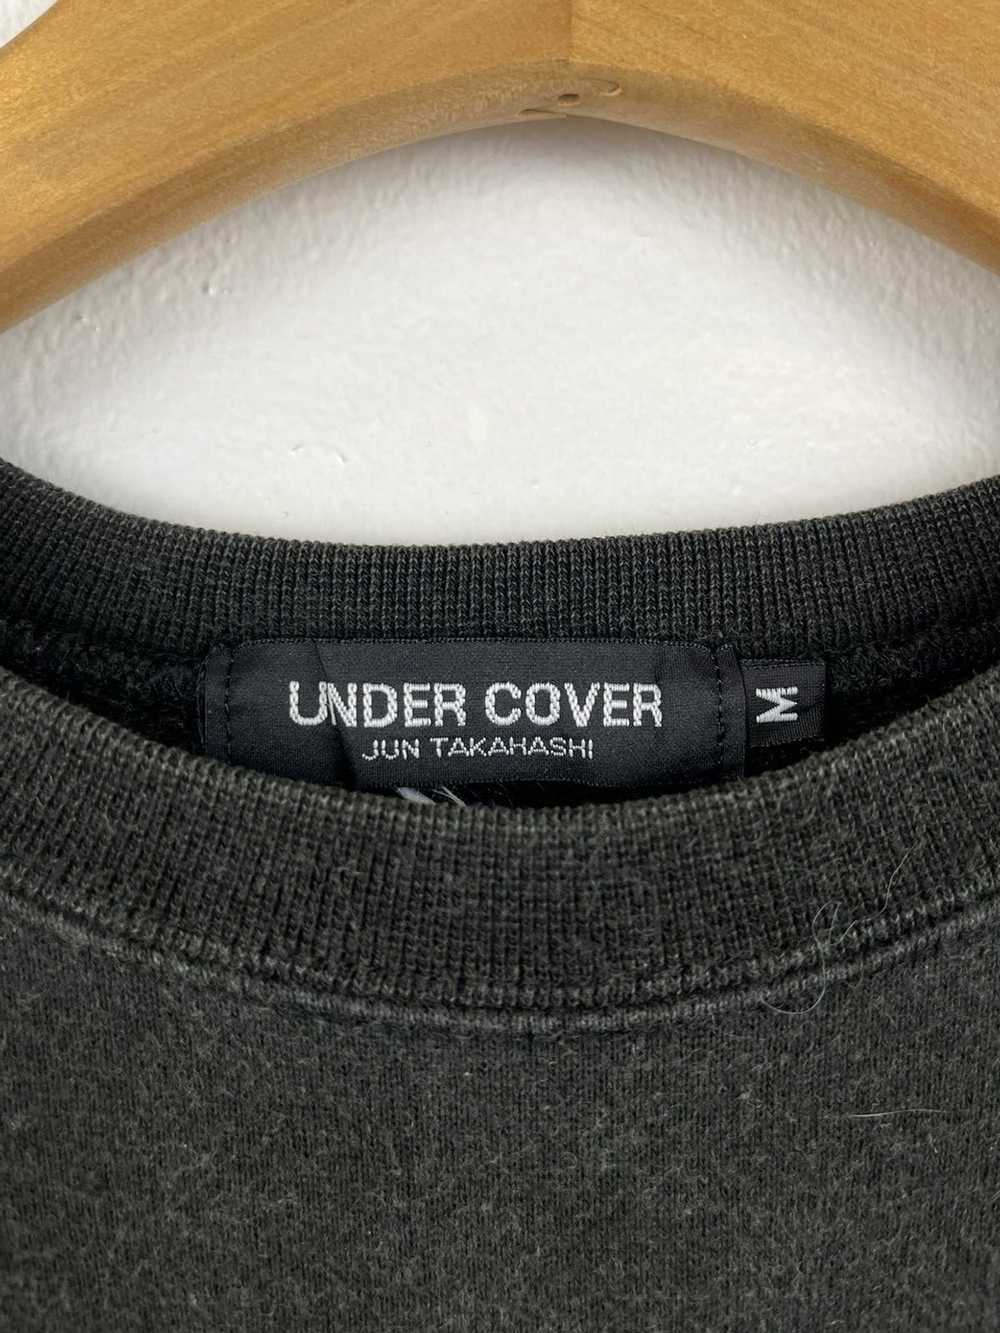 Undercover Undercover Tokyo Sweater - image 3